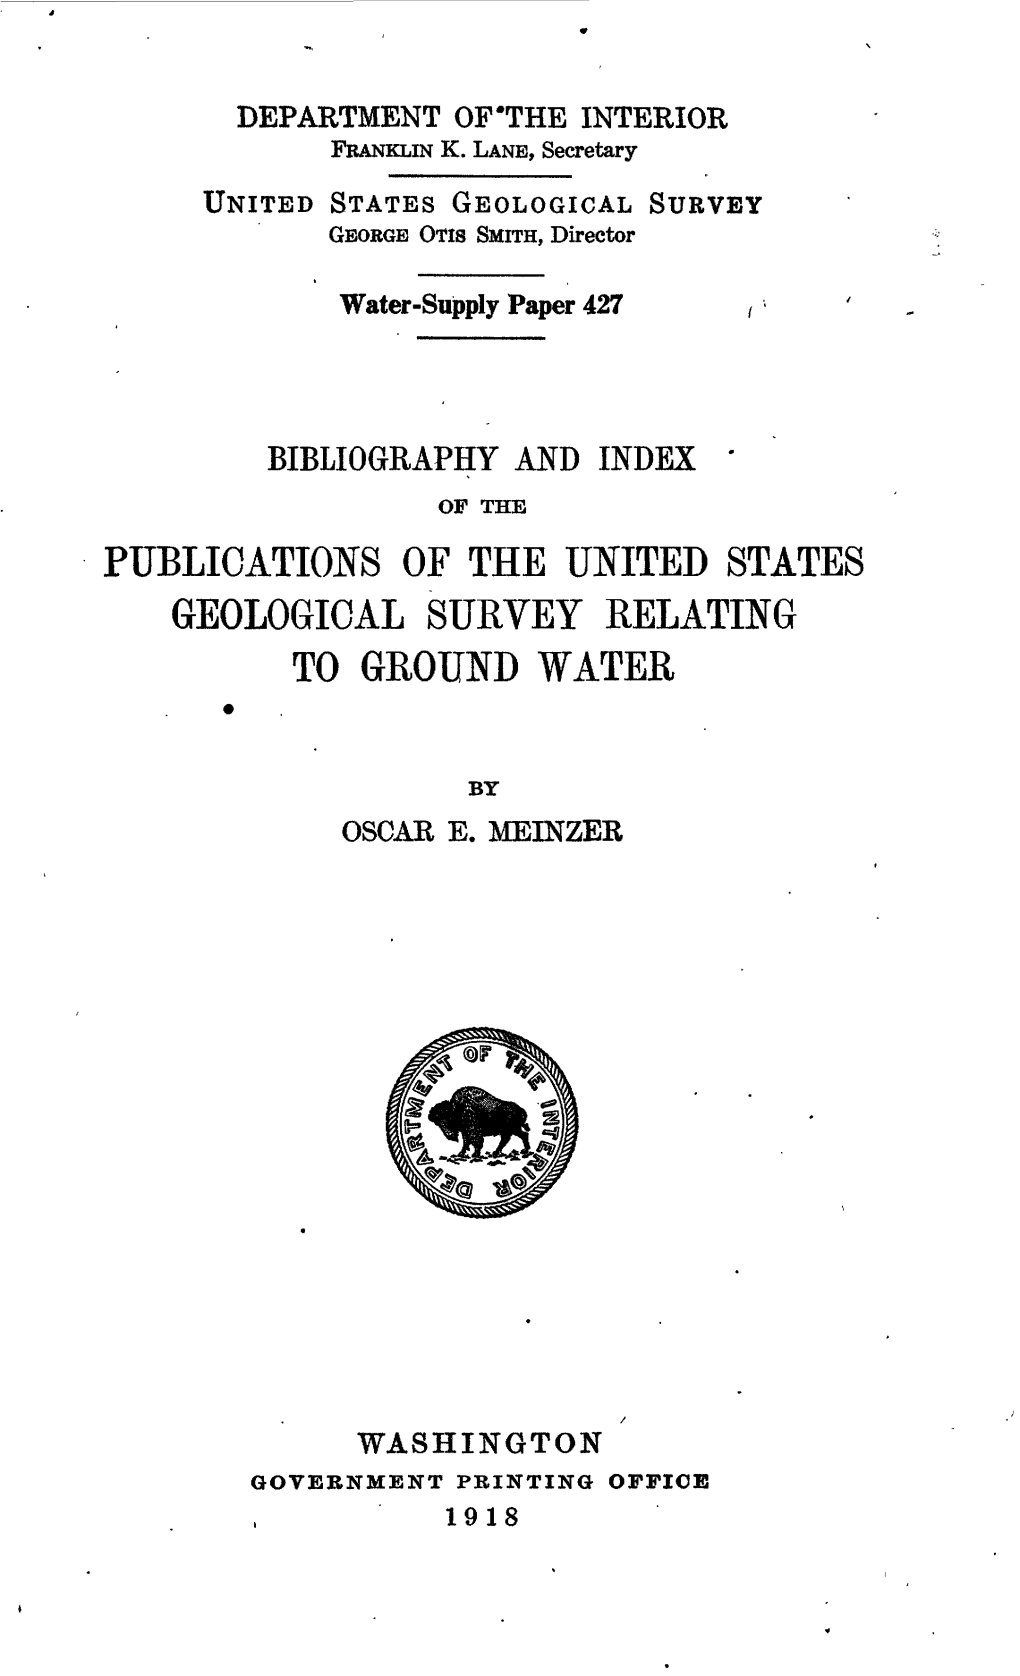 Publications of the United States Geological Survey Relating to Ground Water